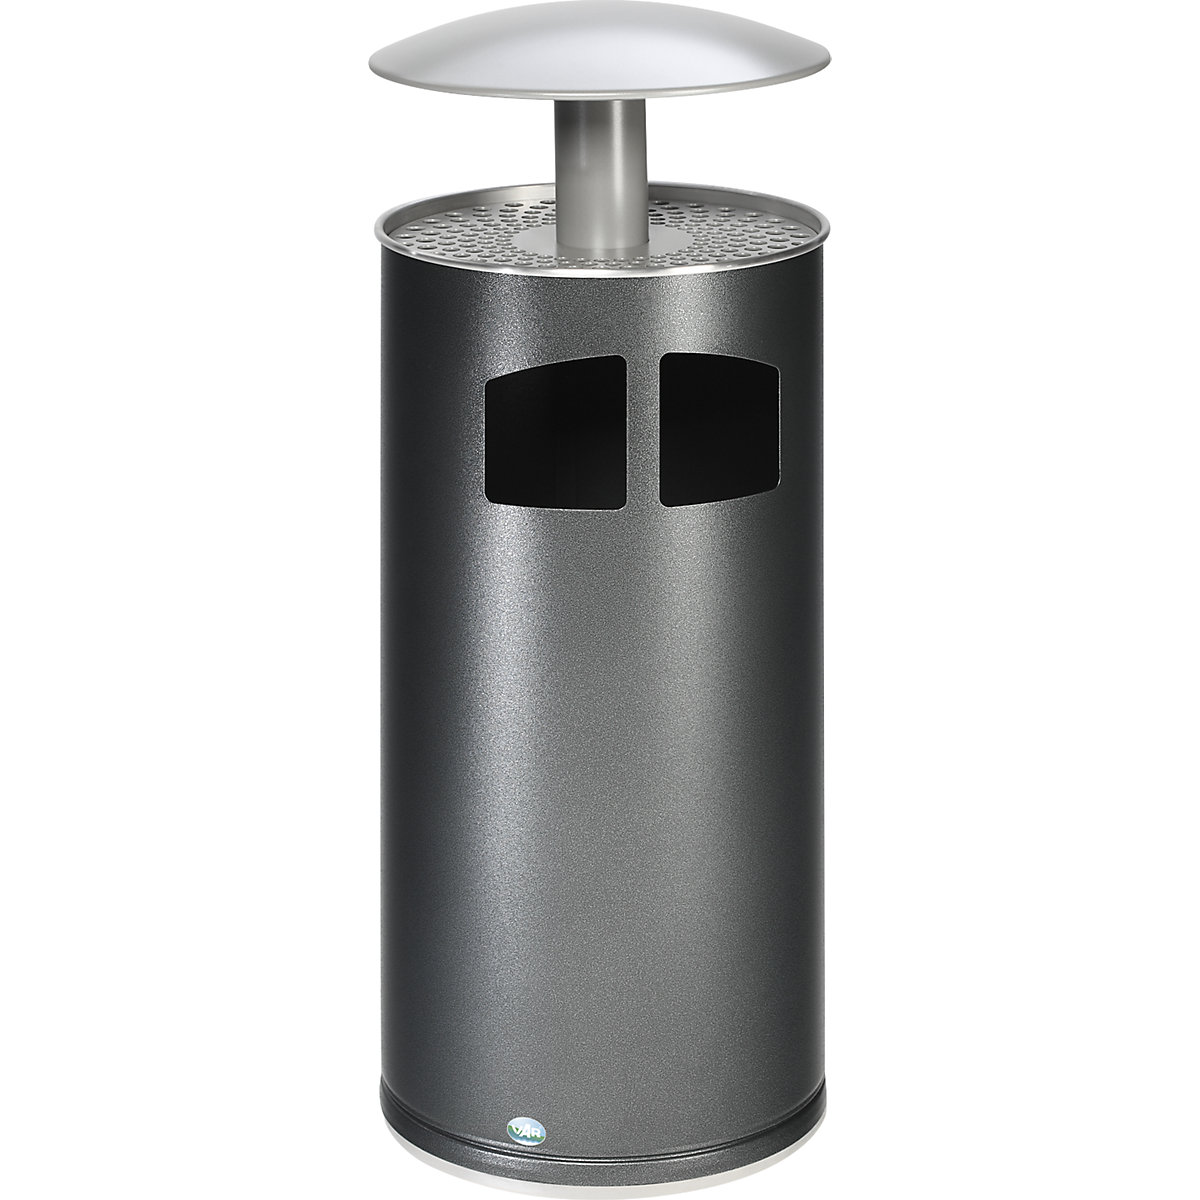 Waste collector/ashtray including inner container – VAR